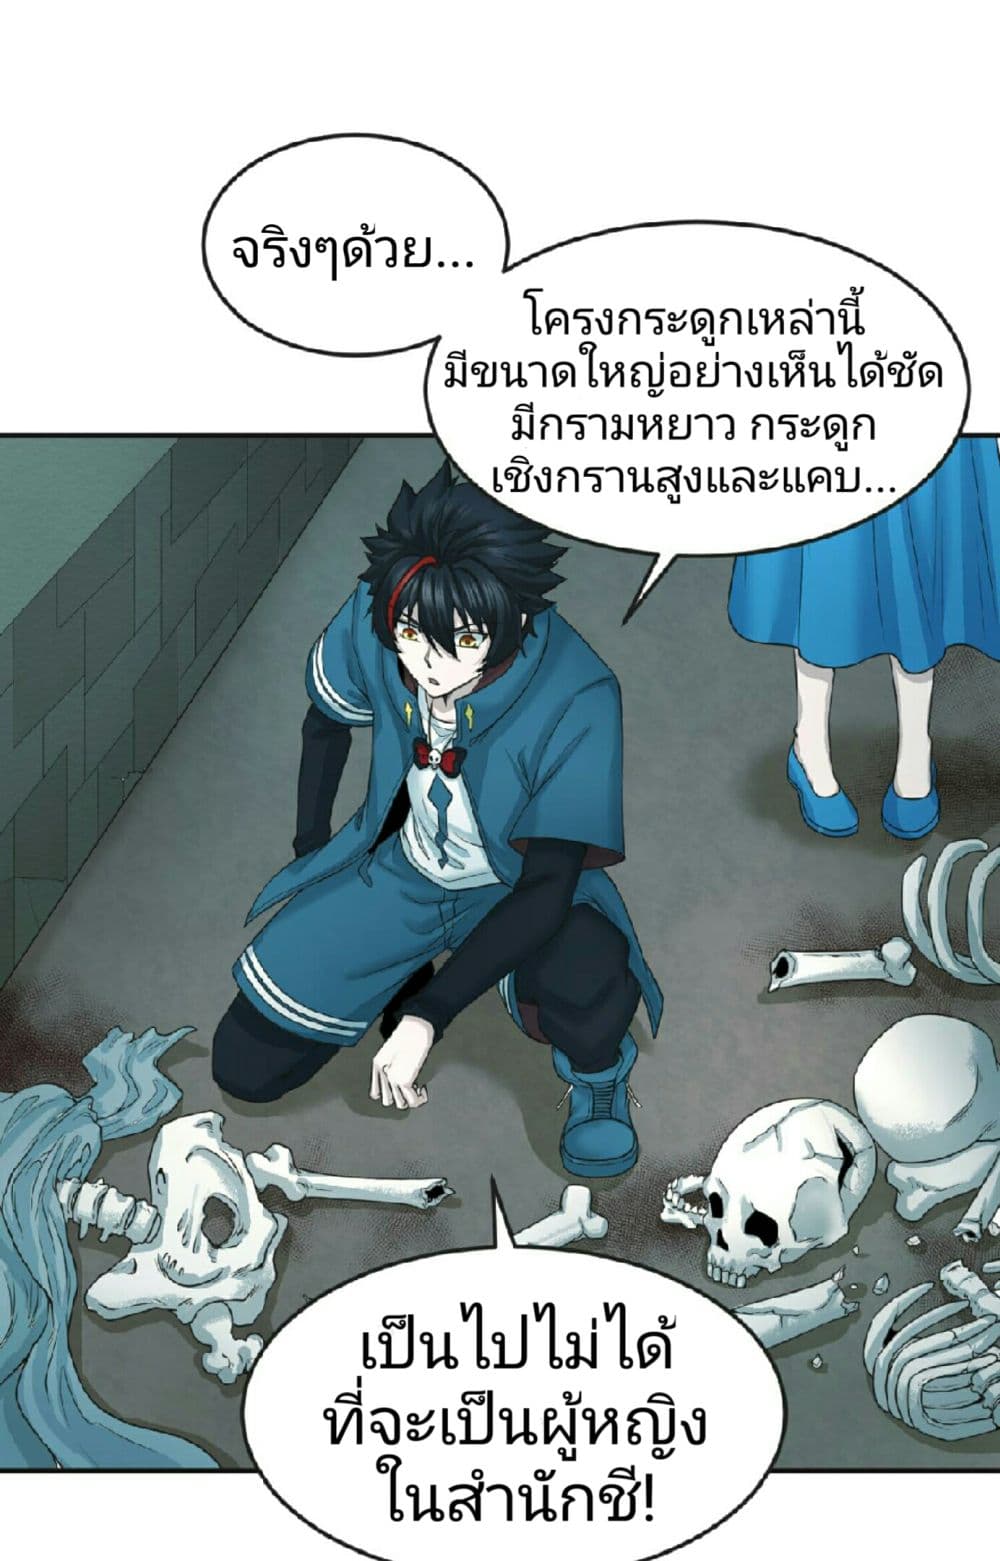 The Age of Ghost Spirits à¸à¸­à¸à¸à¸µà¹ 50 (2)